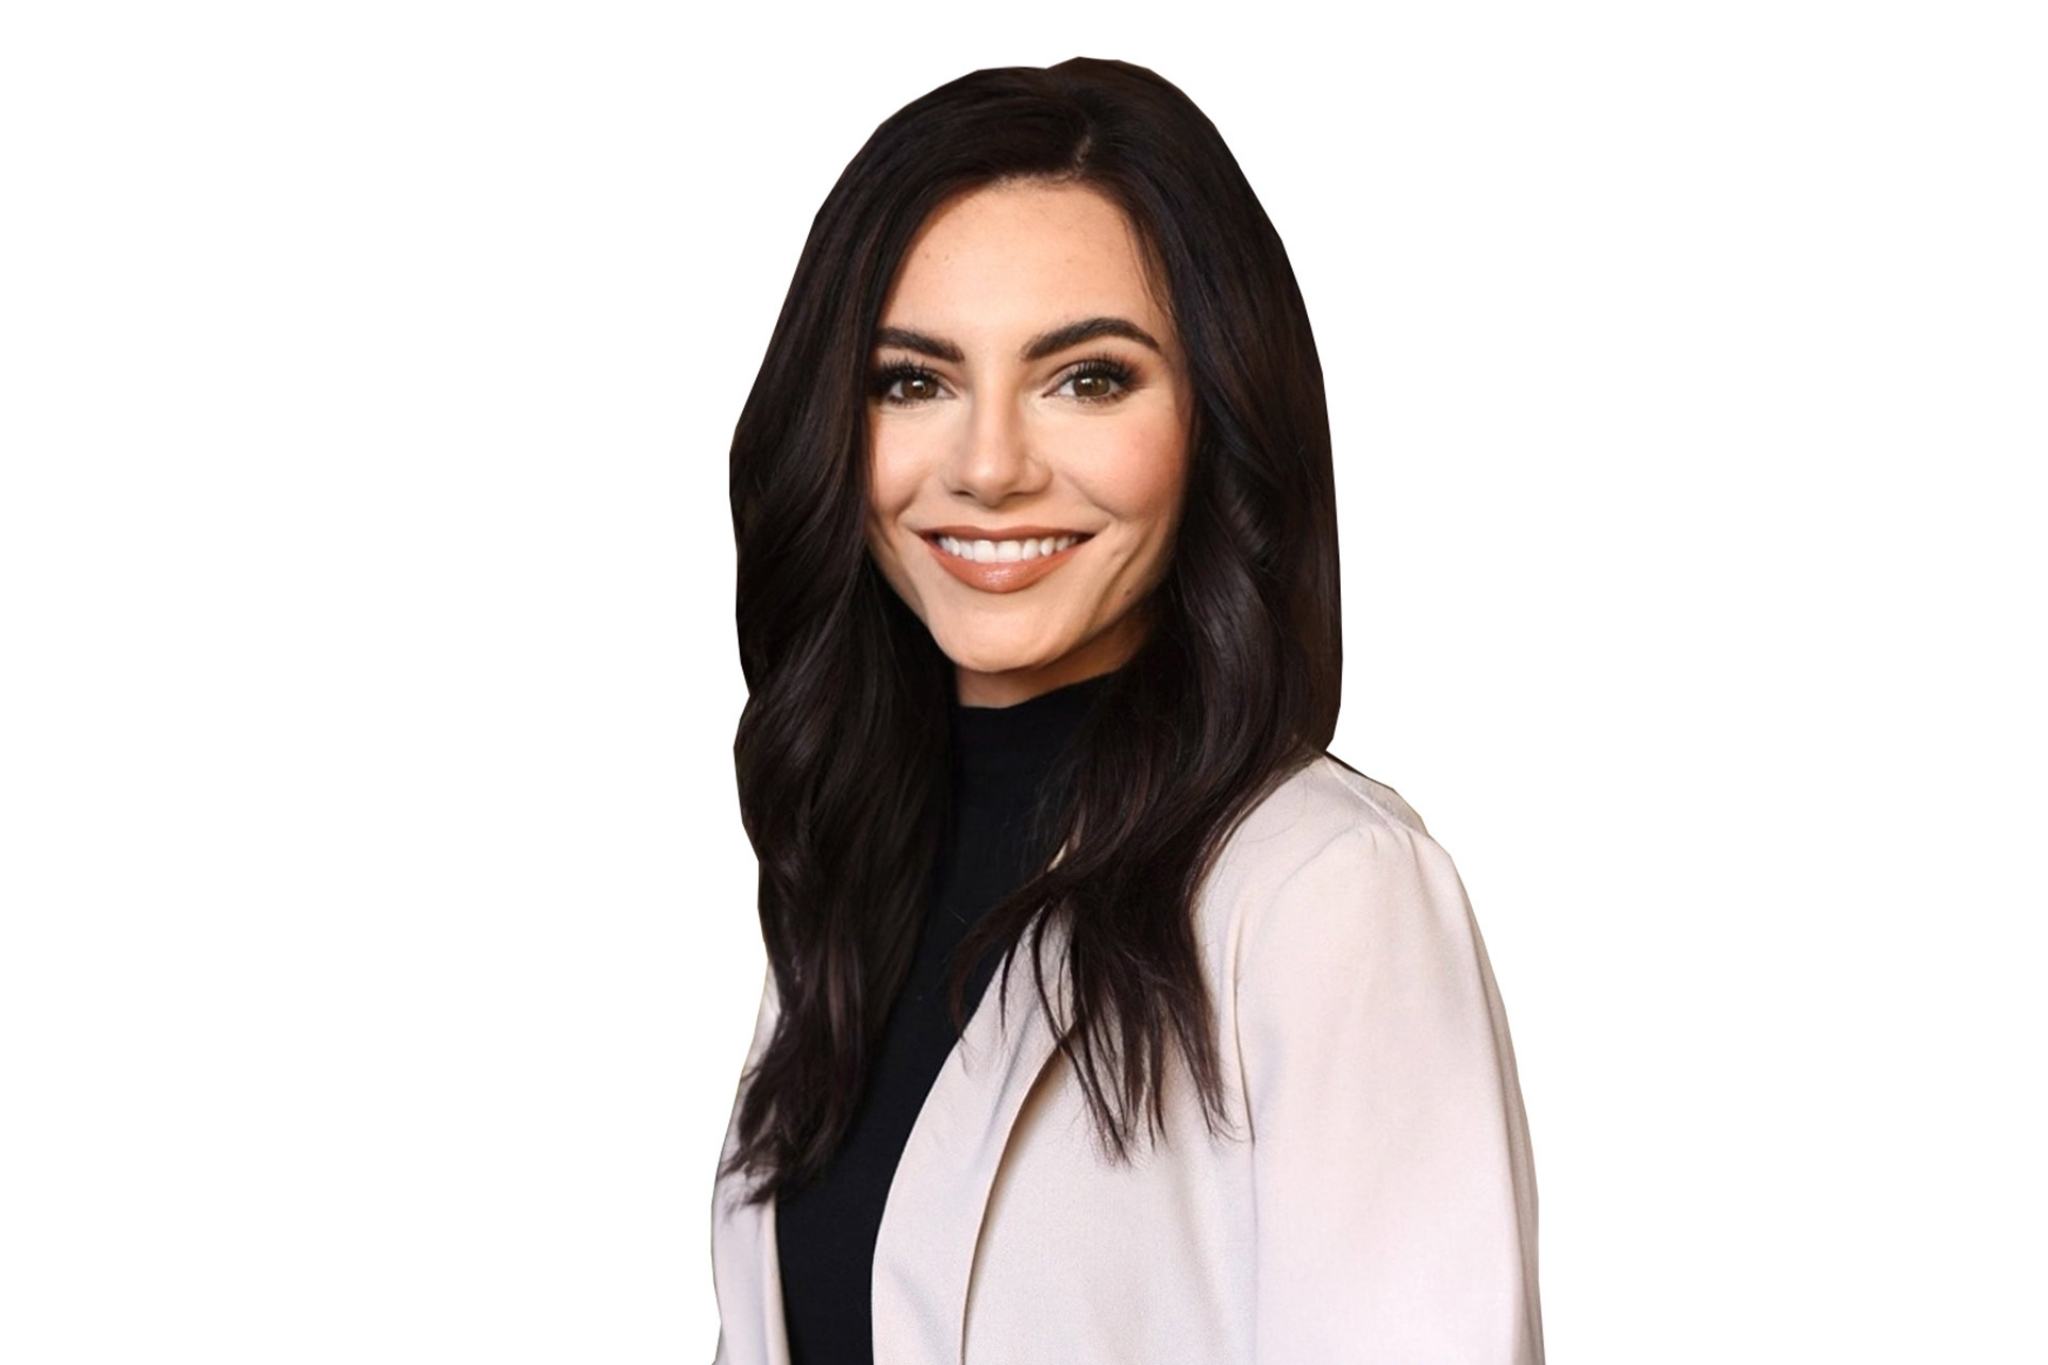 Woman smiling for professional headshot